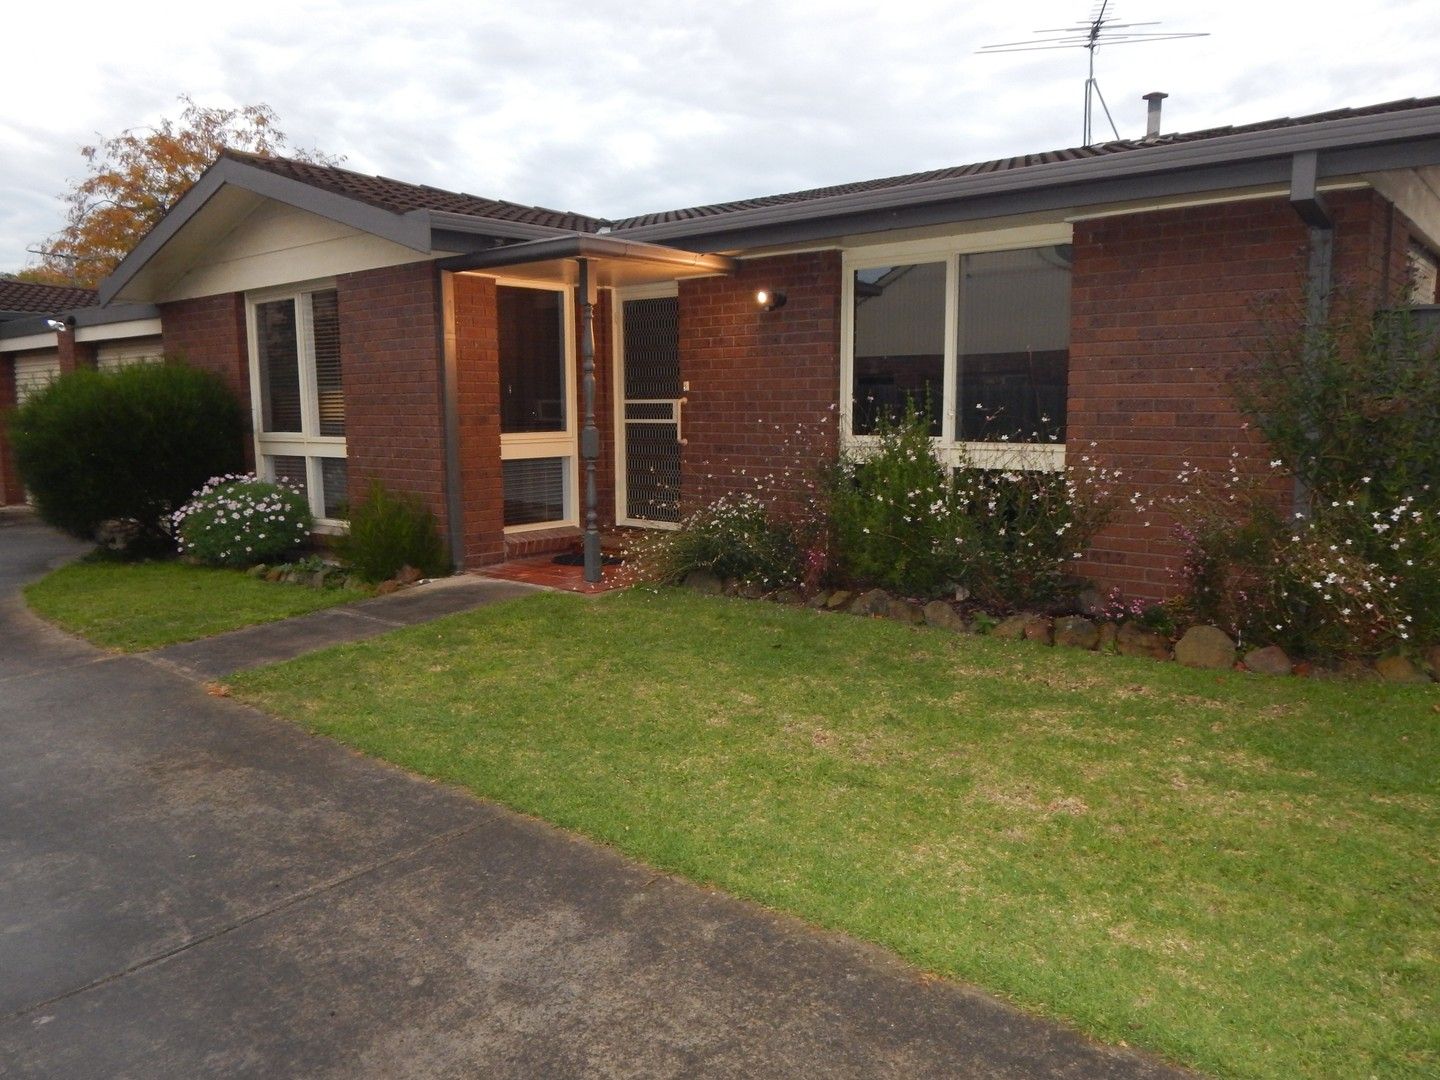 2 bedrooms Townhouse in 1/57 Calder Street MANIFOLD HEIGHTS VIC, 3218